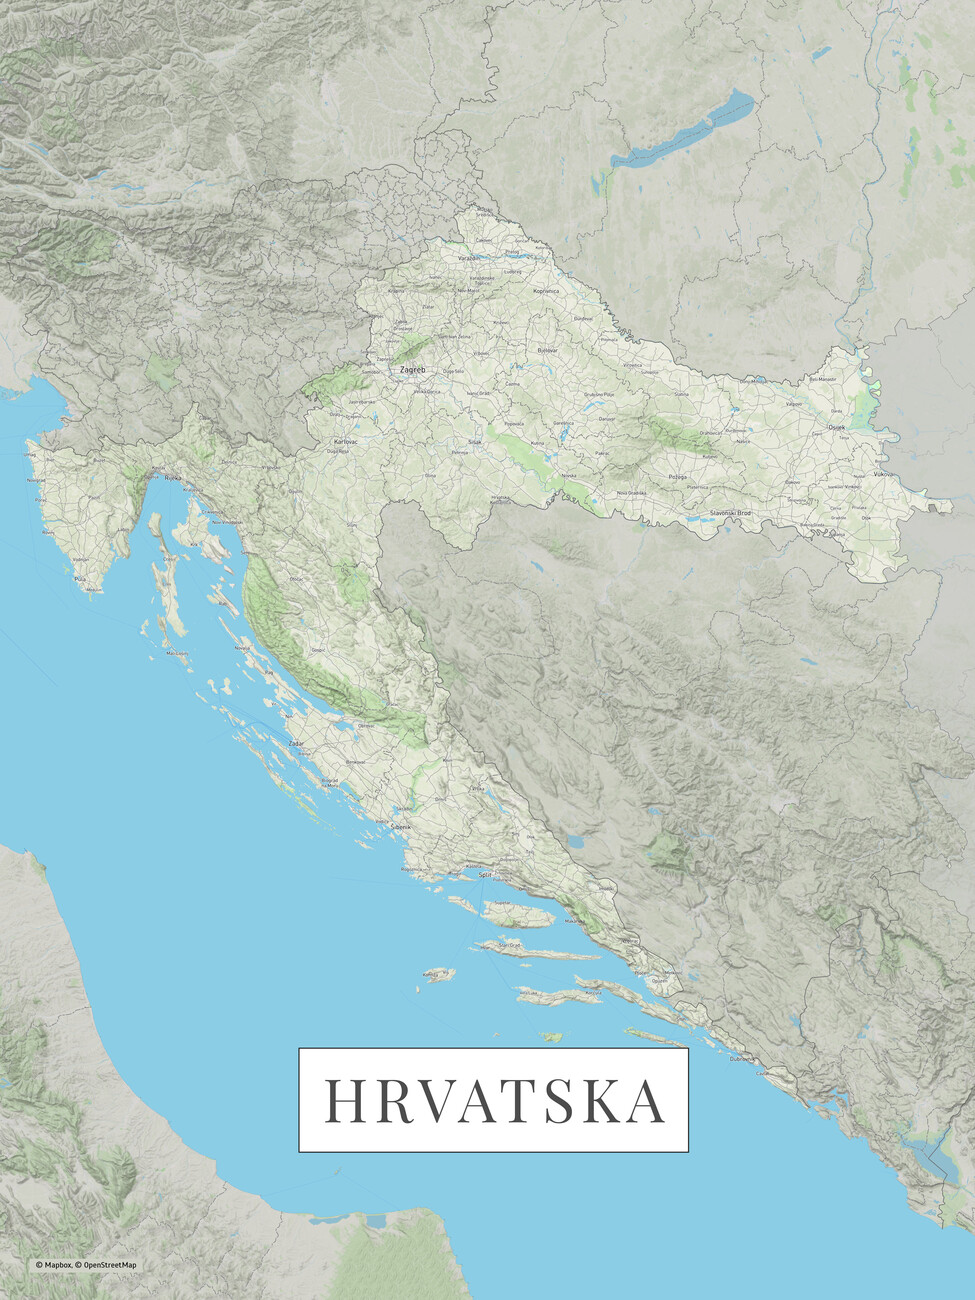 Map of Hrvatska color ǀ Maps of all cities and countries for your wall